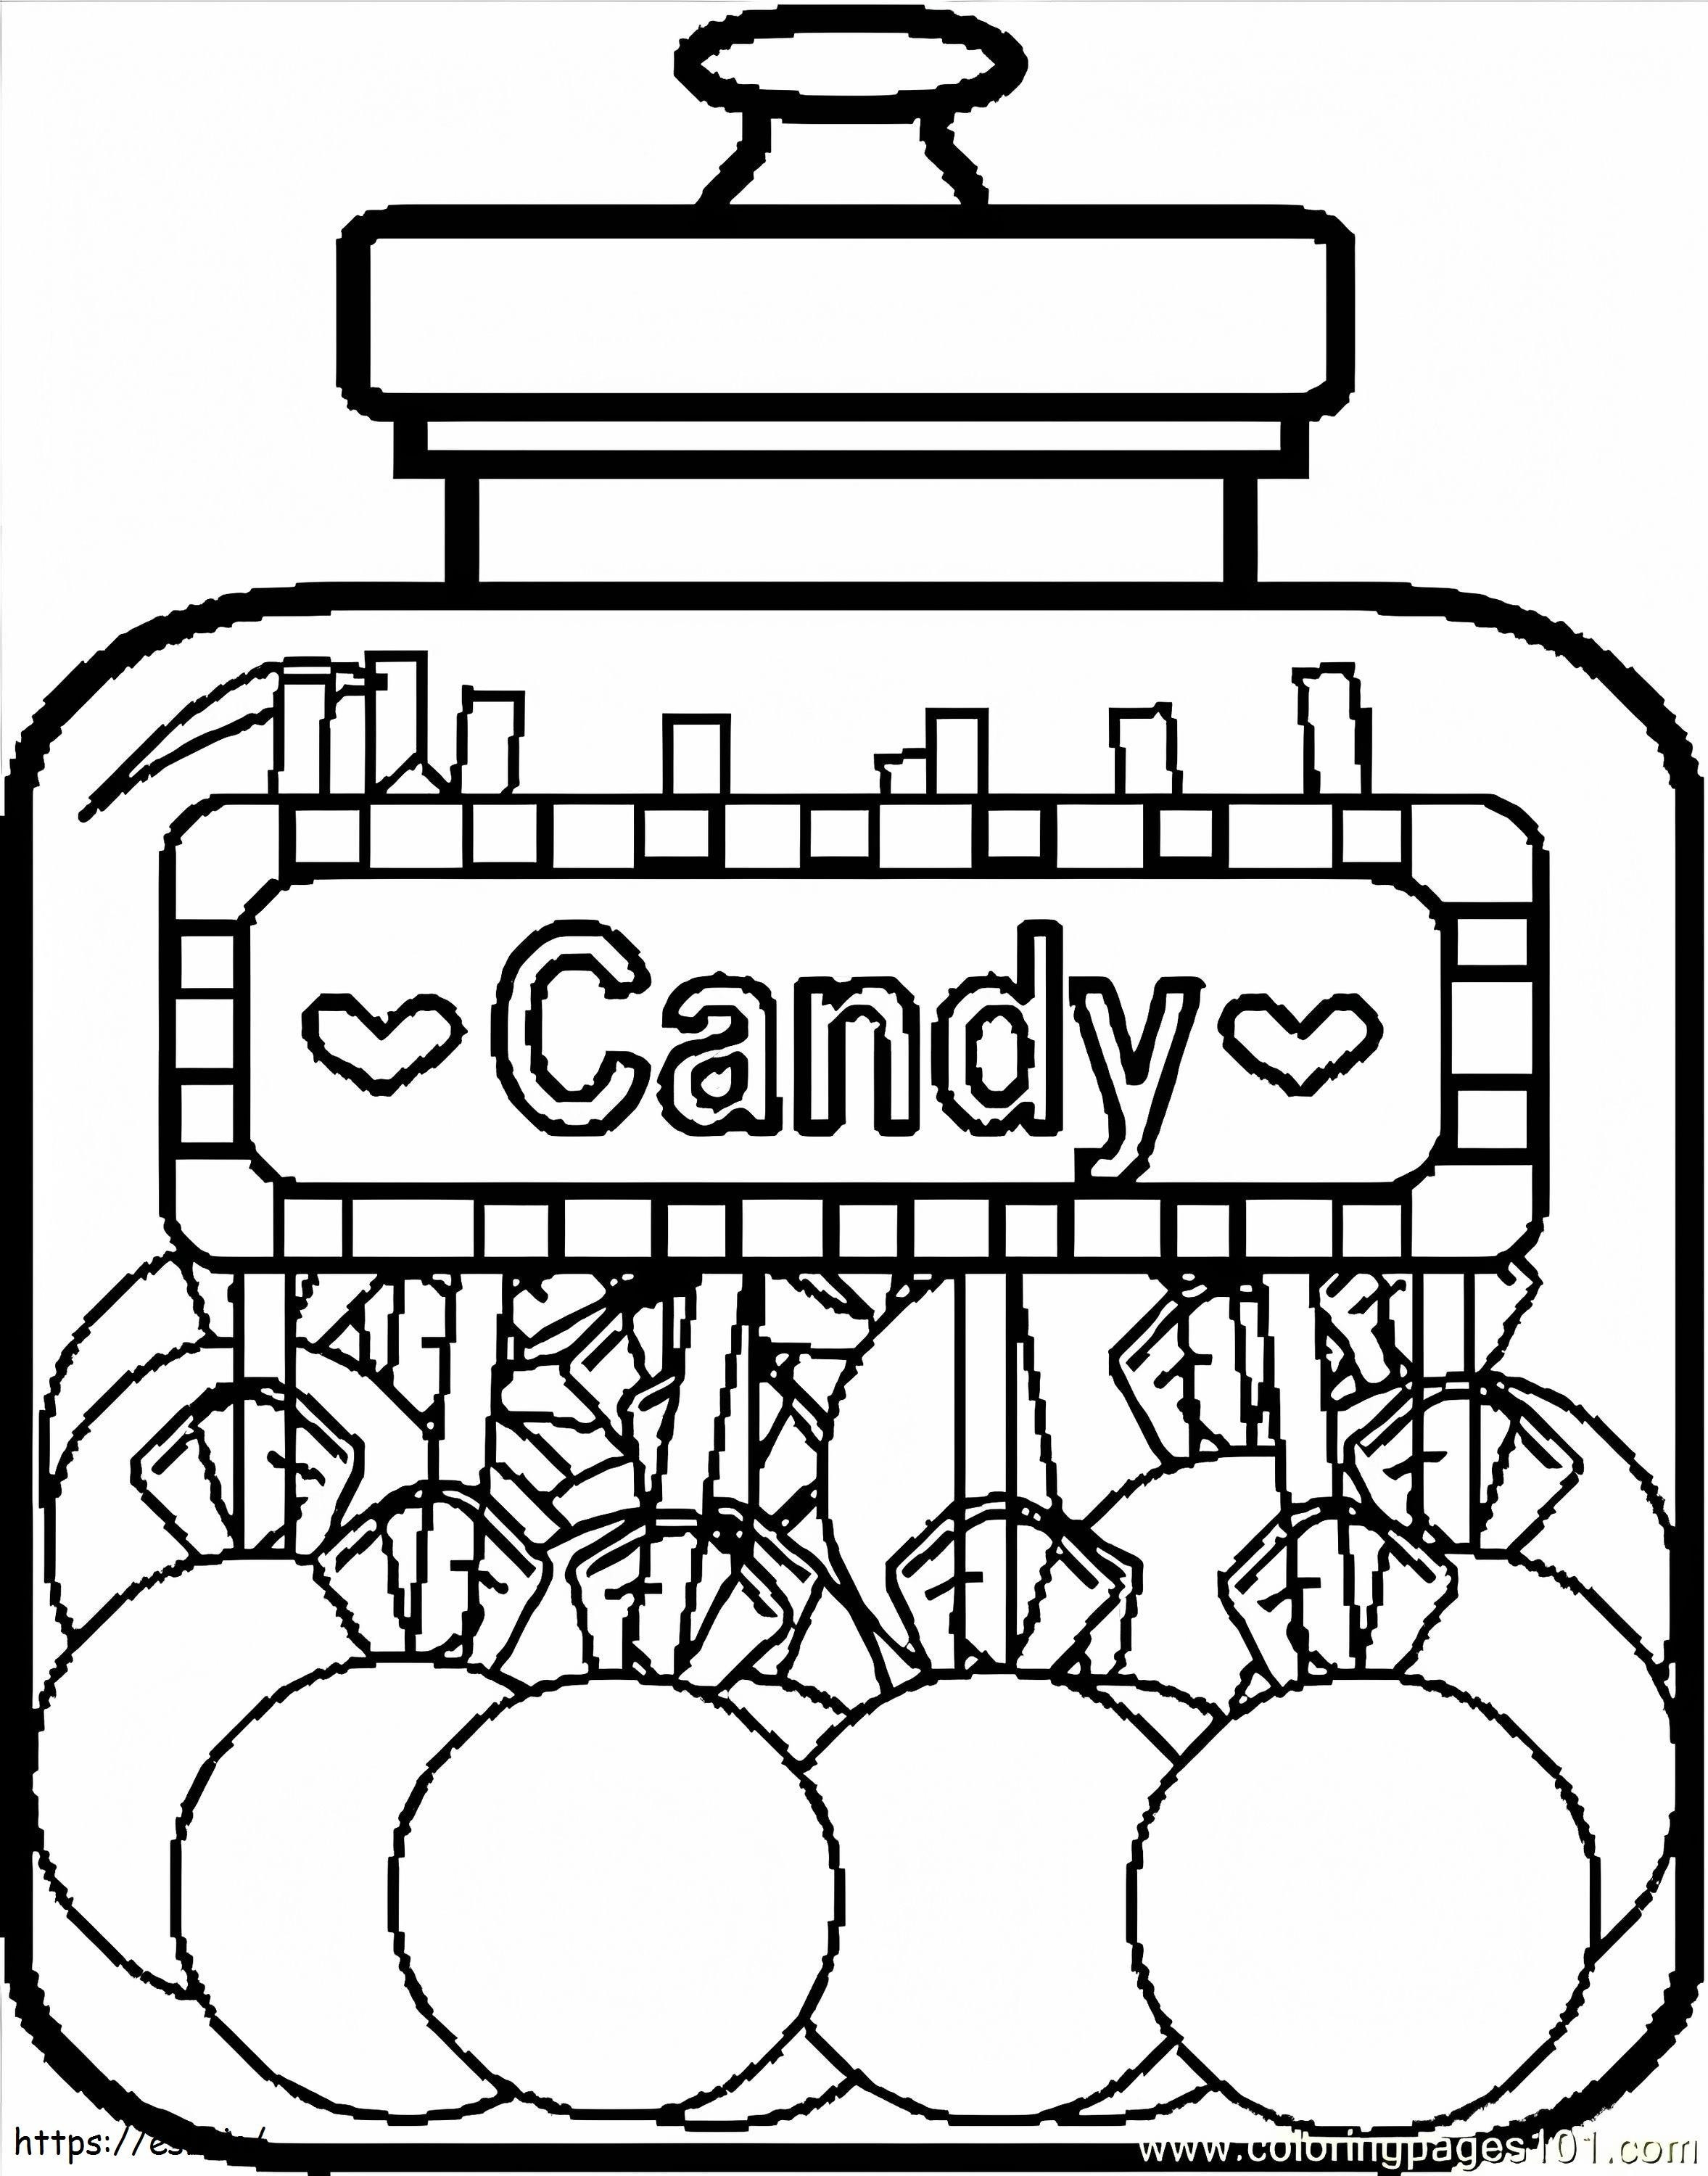 Candy Jar coloring page